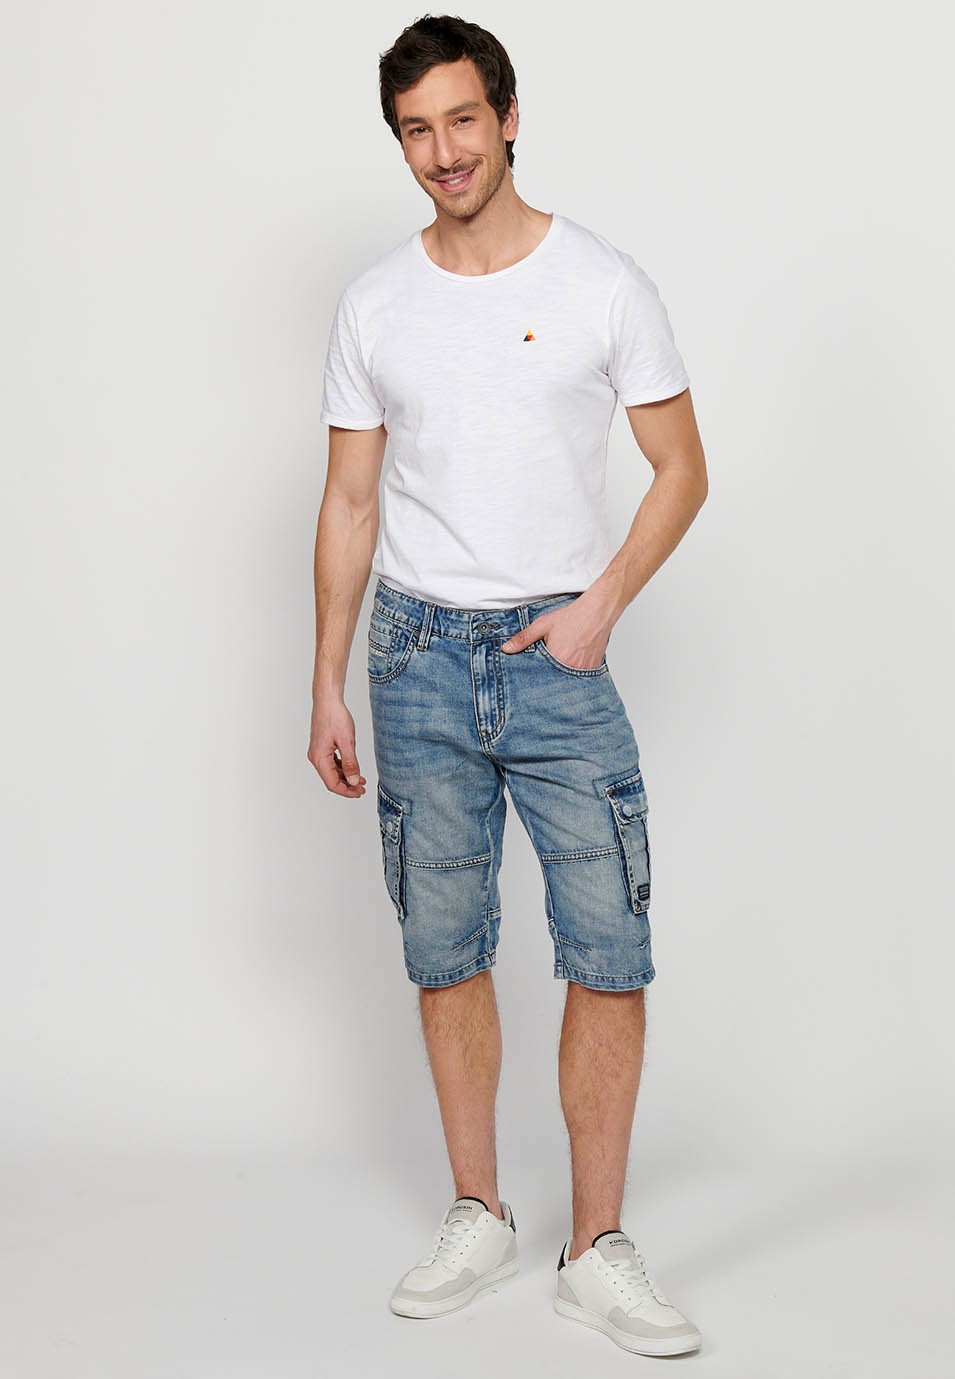 Denim Bermuda cargo shorts with front zipper and button closure with five pockets, one ticket pocket and two light blue sides, for Men